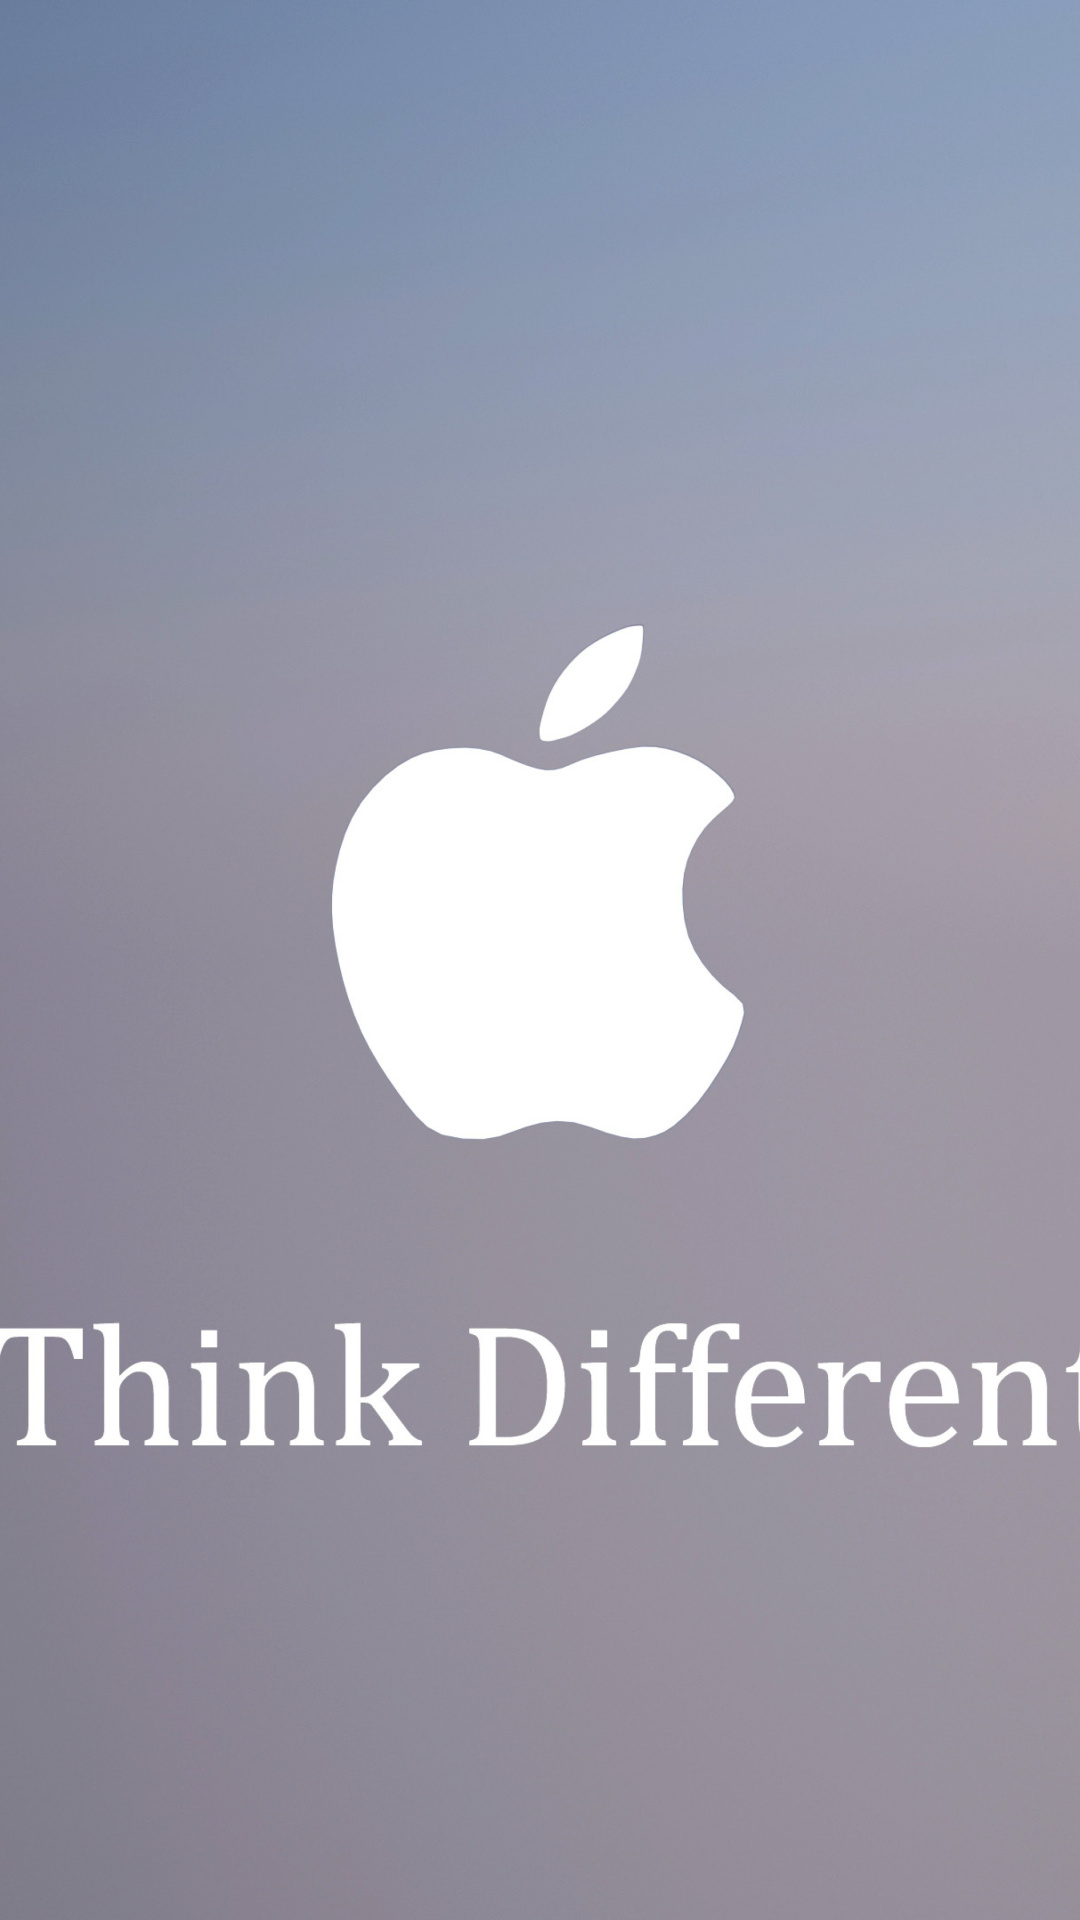 Apple, Think Different wallpaper 1080x1920